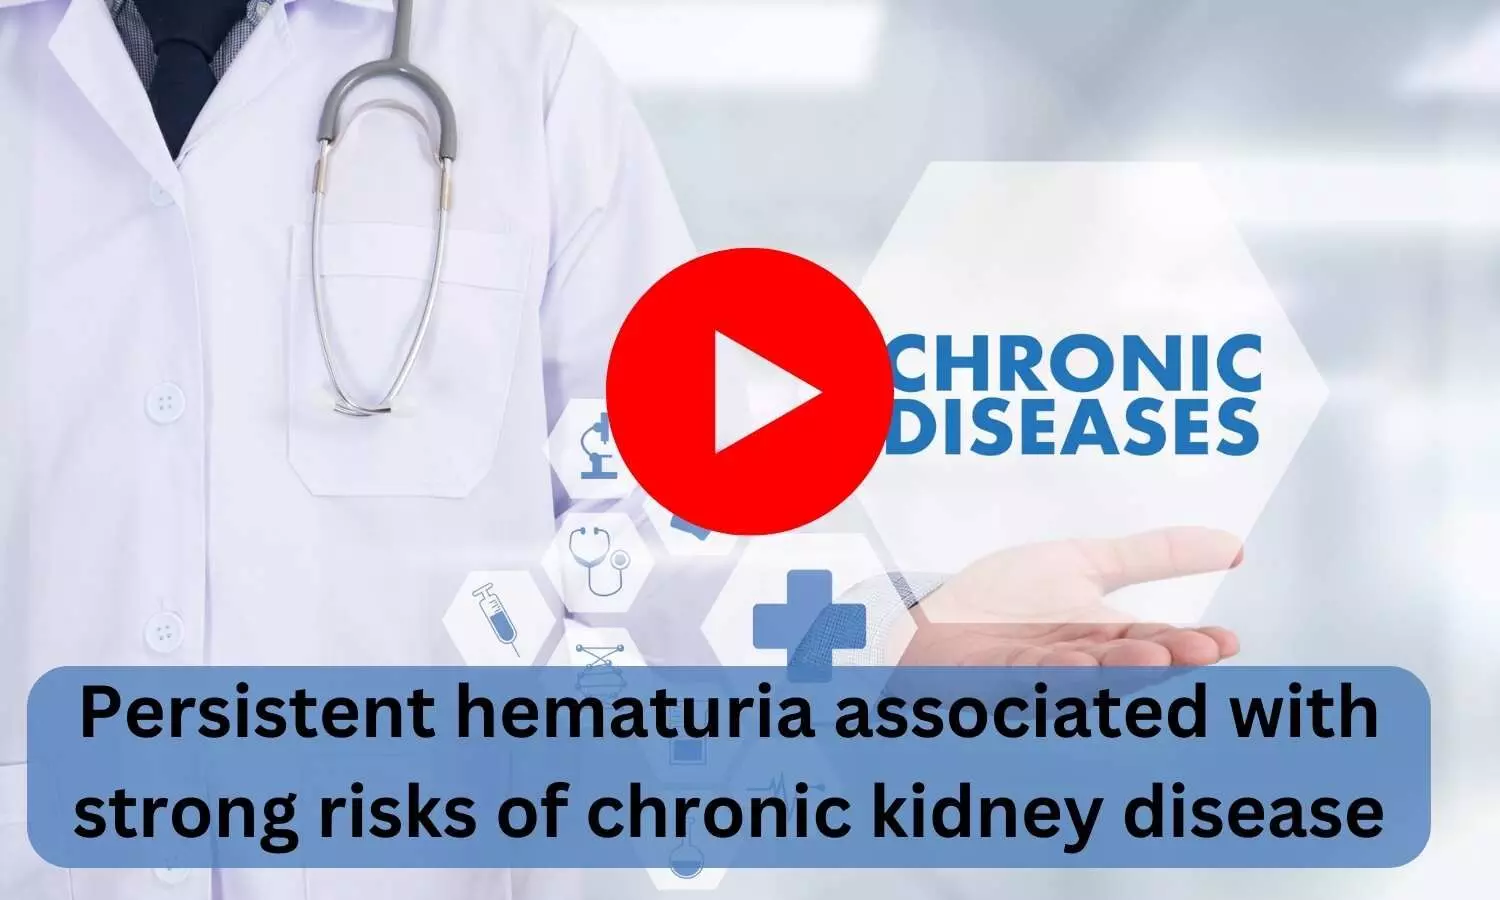 Persistent hematuria associated with strong risks of chronic kidney disease